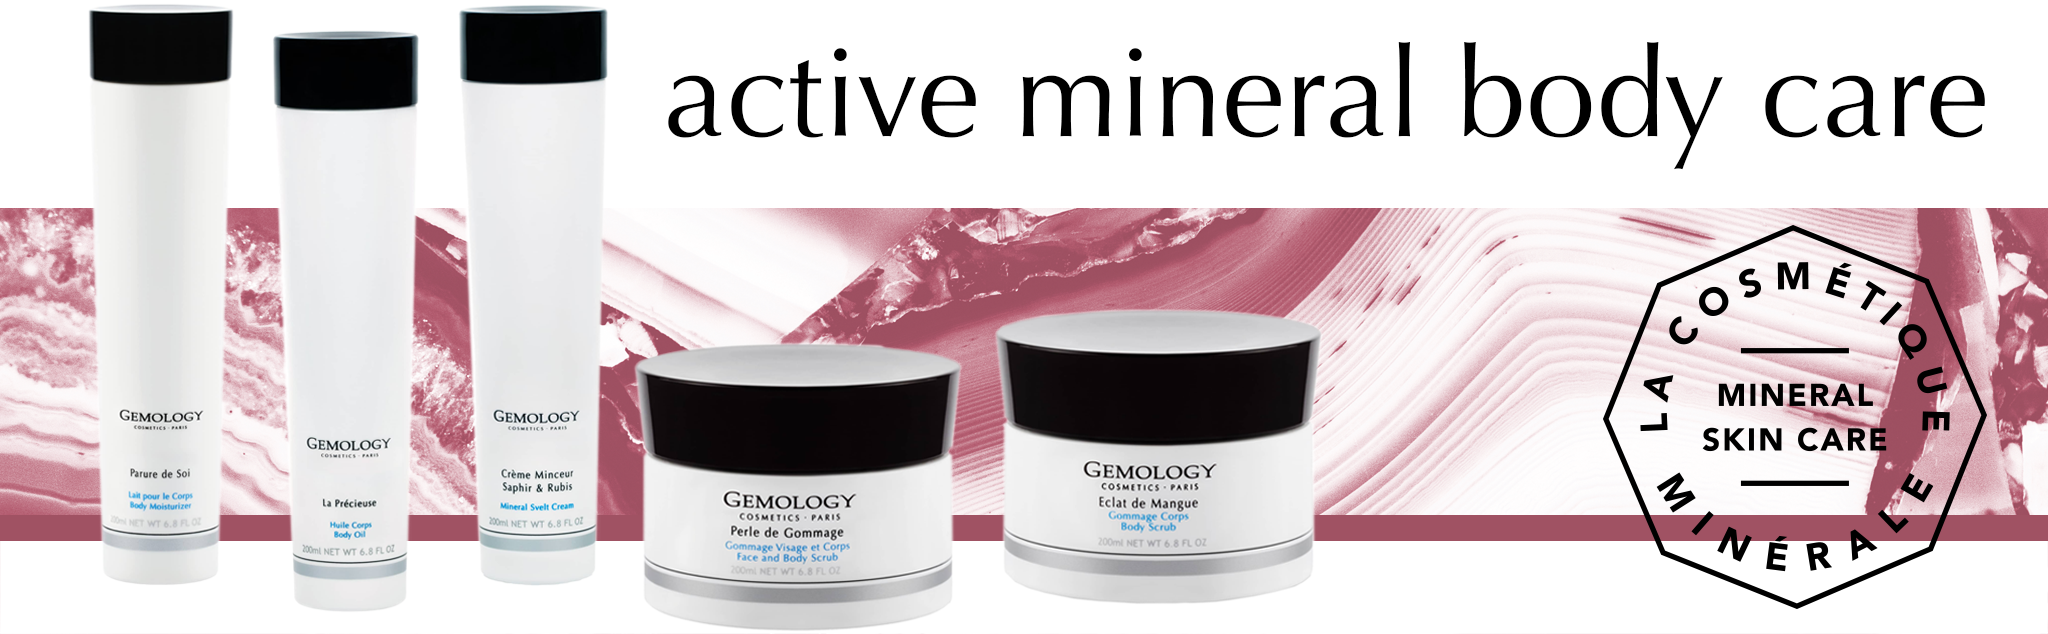 Gemology-cosmetics-paris-active-mineral-body-care-skincare-products-australia-new-zealand